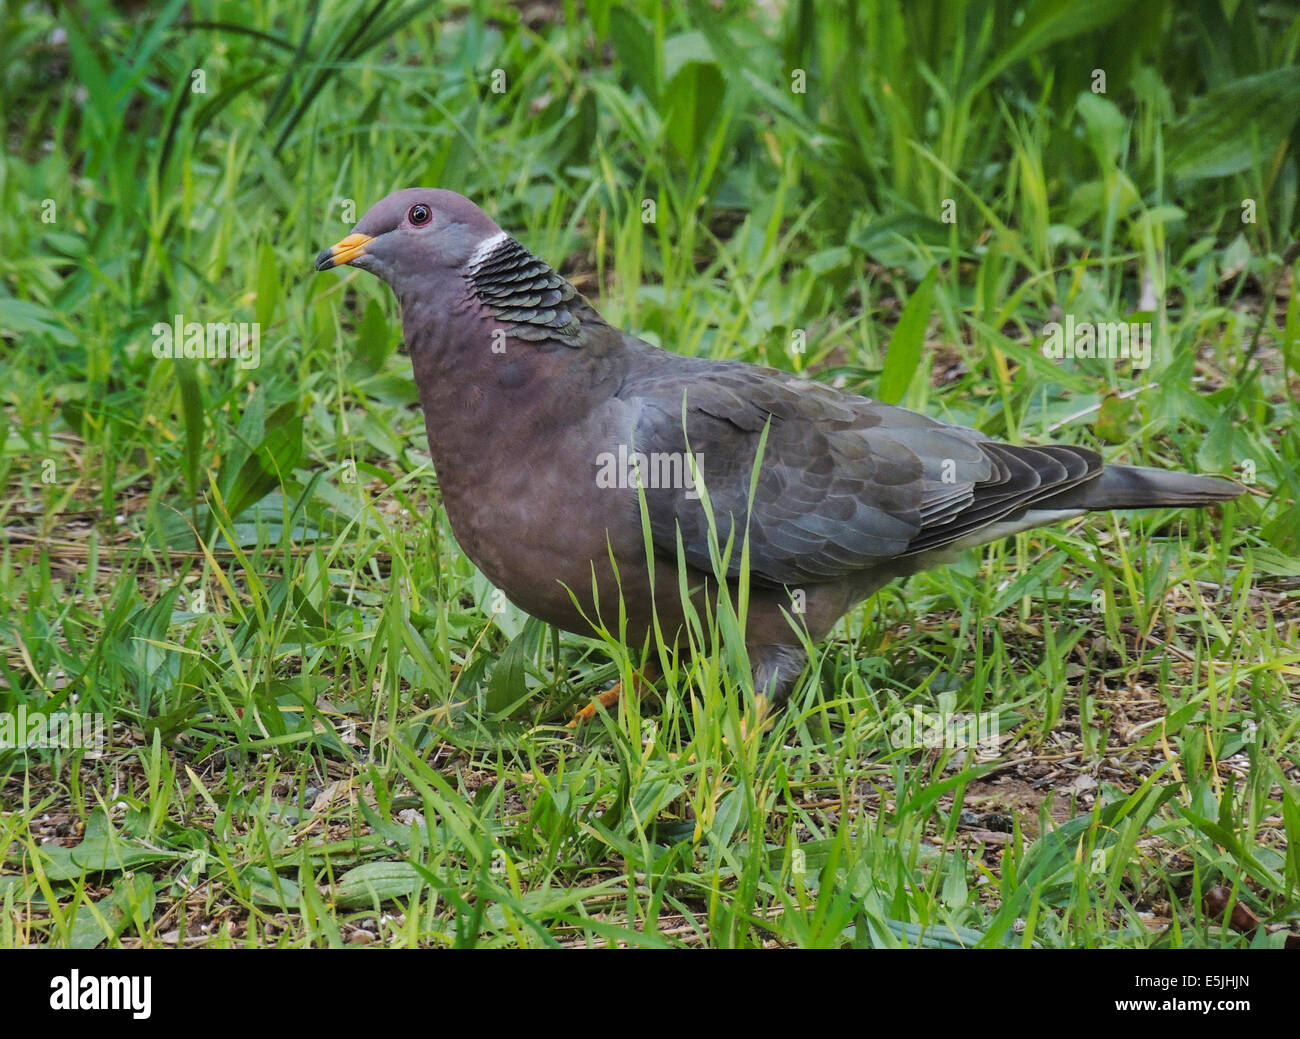 A Band-tailed Pigeon (Patagioenas fasciata) forages in a cleaing of the mixed conifer forest of the Sierra foothills of Northern Stock Photo